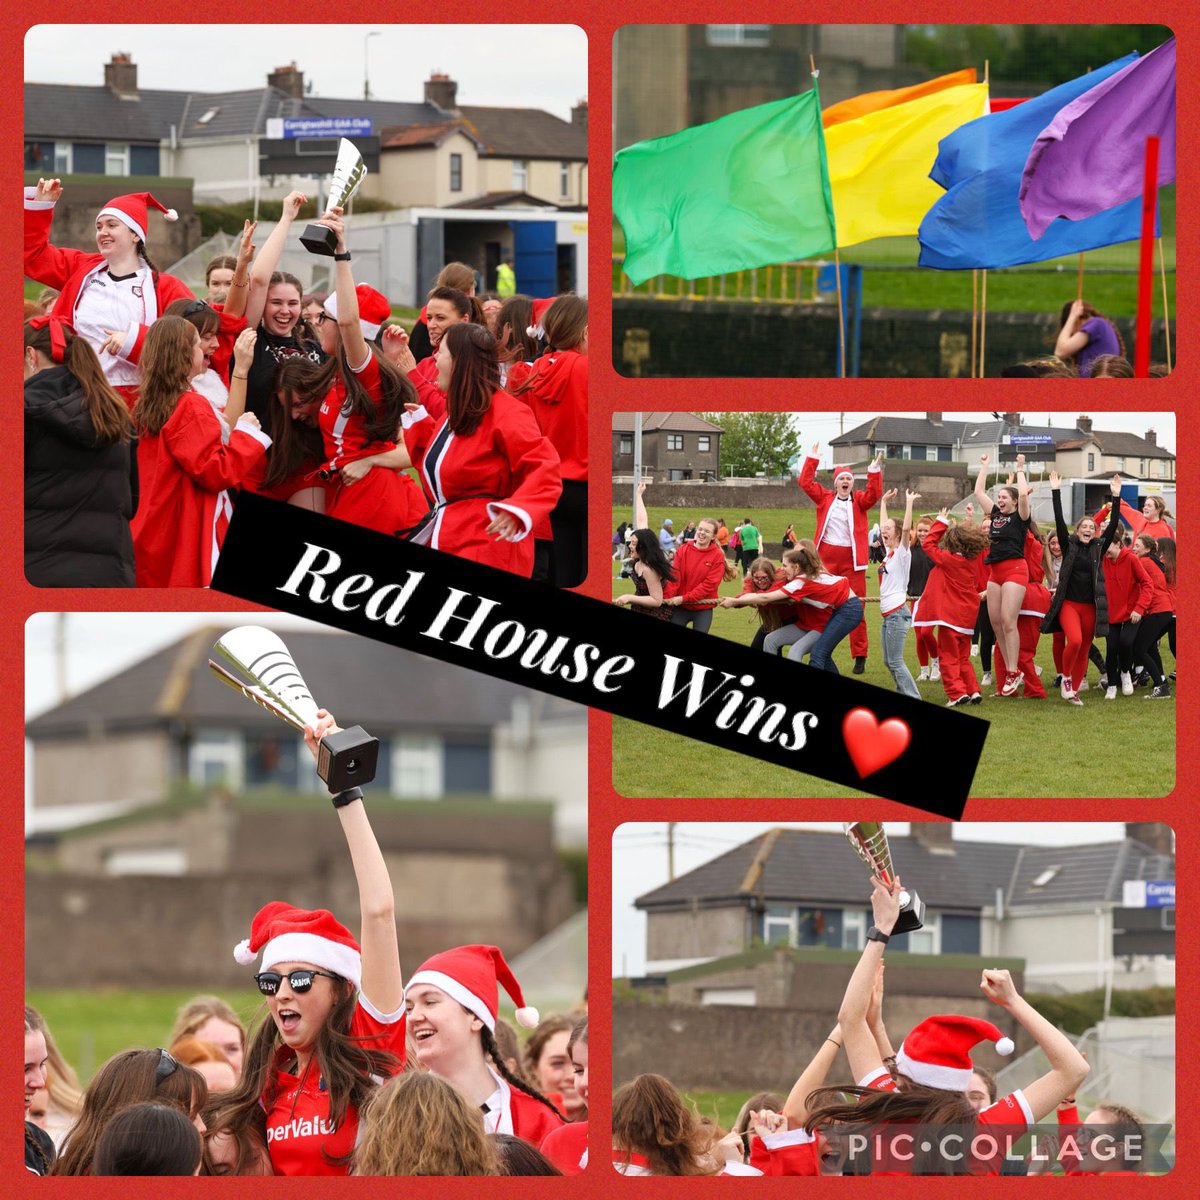 Throwback to our House Fun Day last week 🌈😁. Thank you to all students and staff for the burst of colour and excitement 🎉🎉. It is always a special day to see our school community coming together. Thank you to @Carrig2hillGAA for the use of their top class facilities.